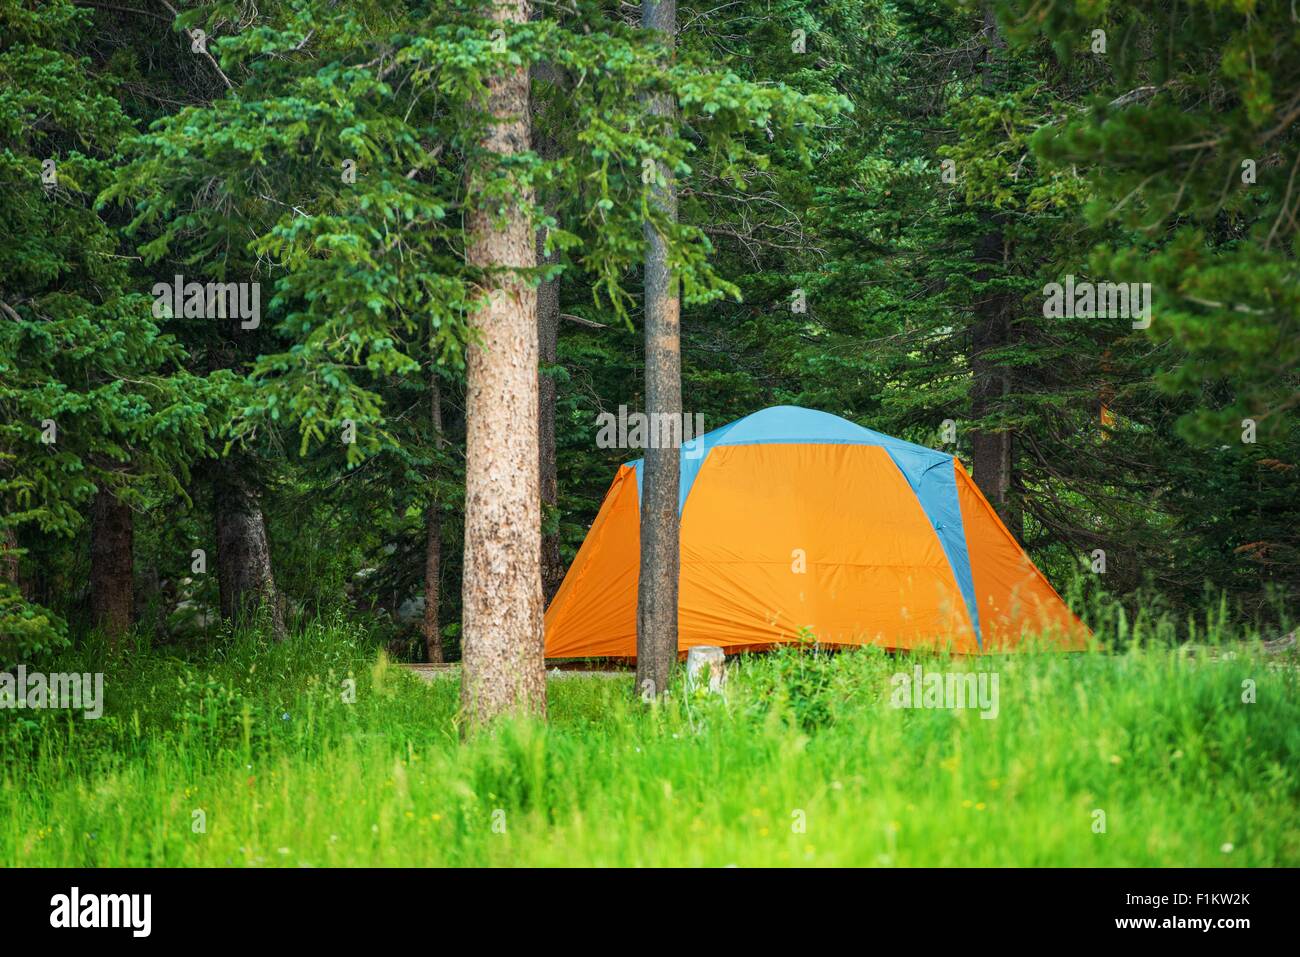 Forest Campground Tent. Orange Tent Between Trees. Stock Photo